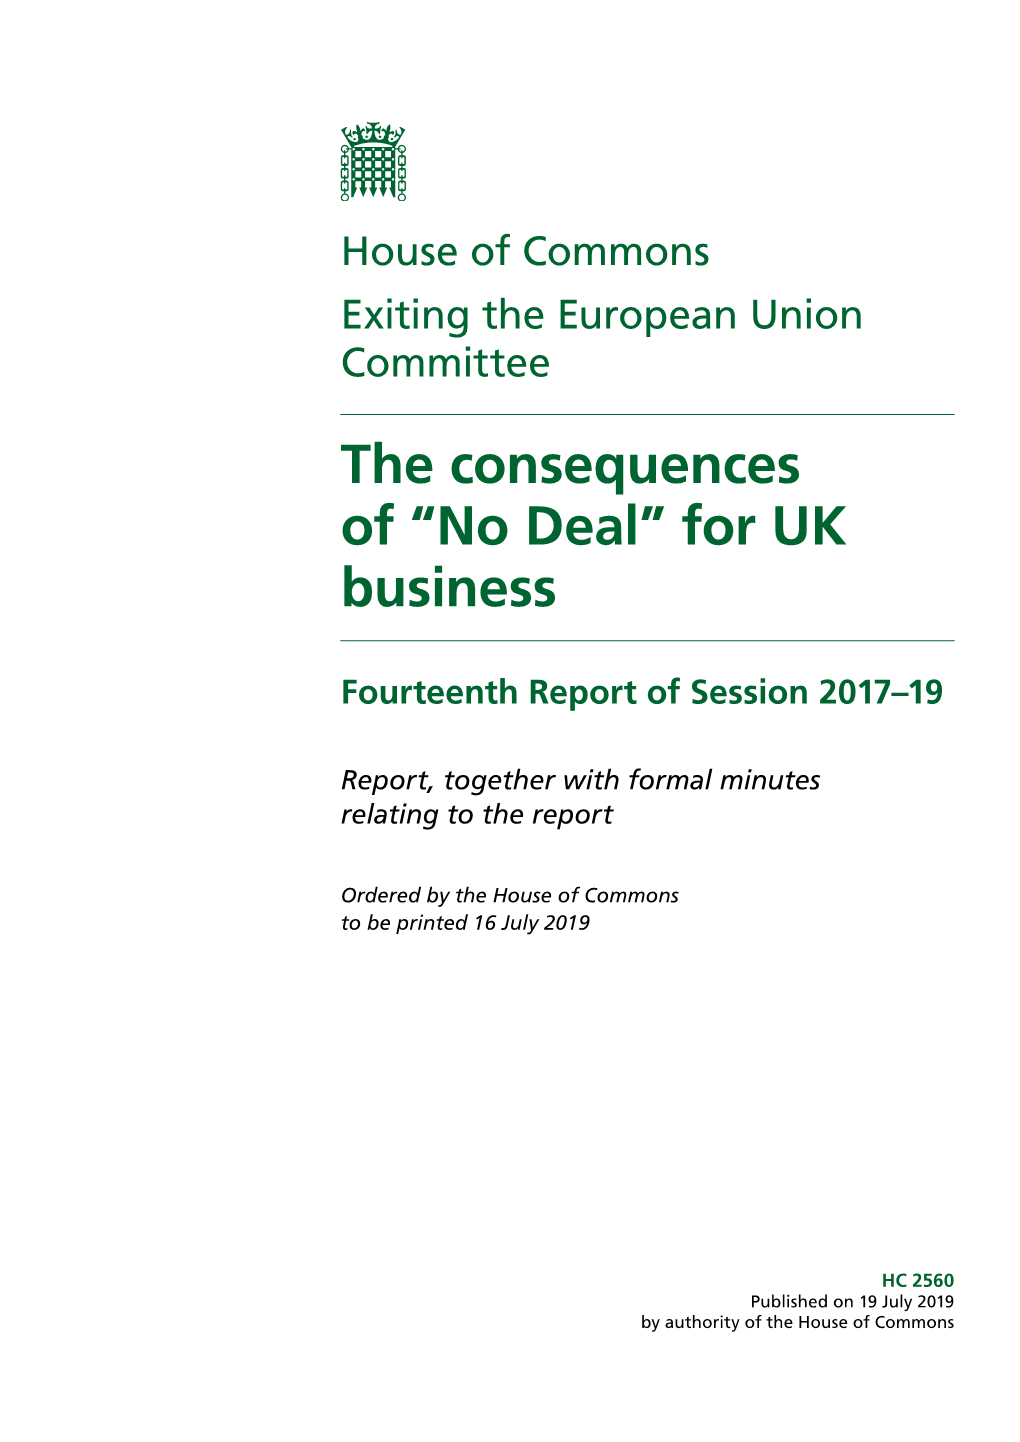 Report (The Consequences of “No Deal” for UK Business)